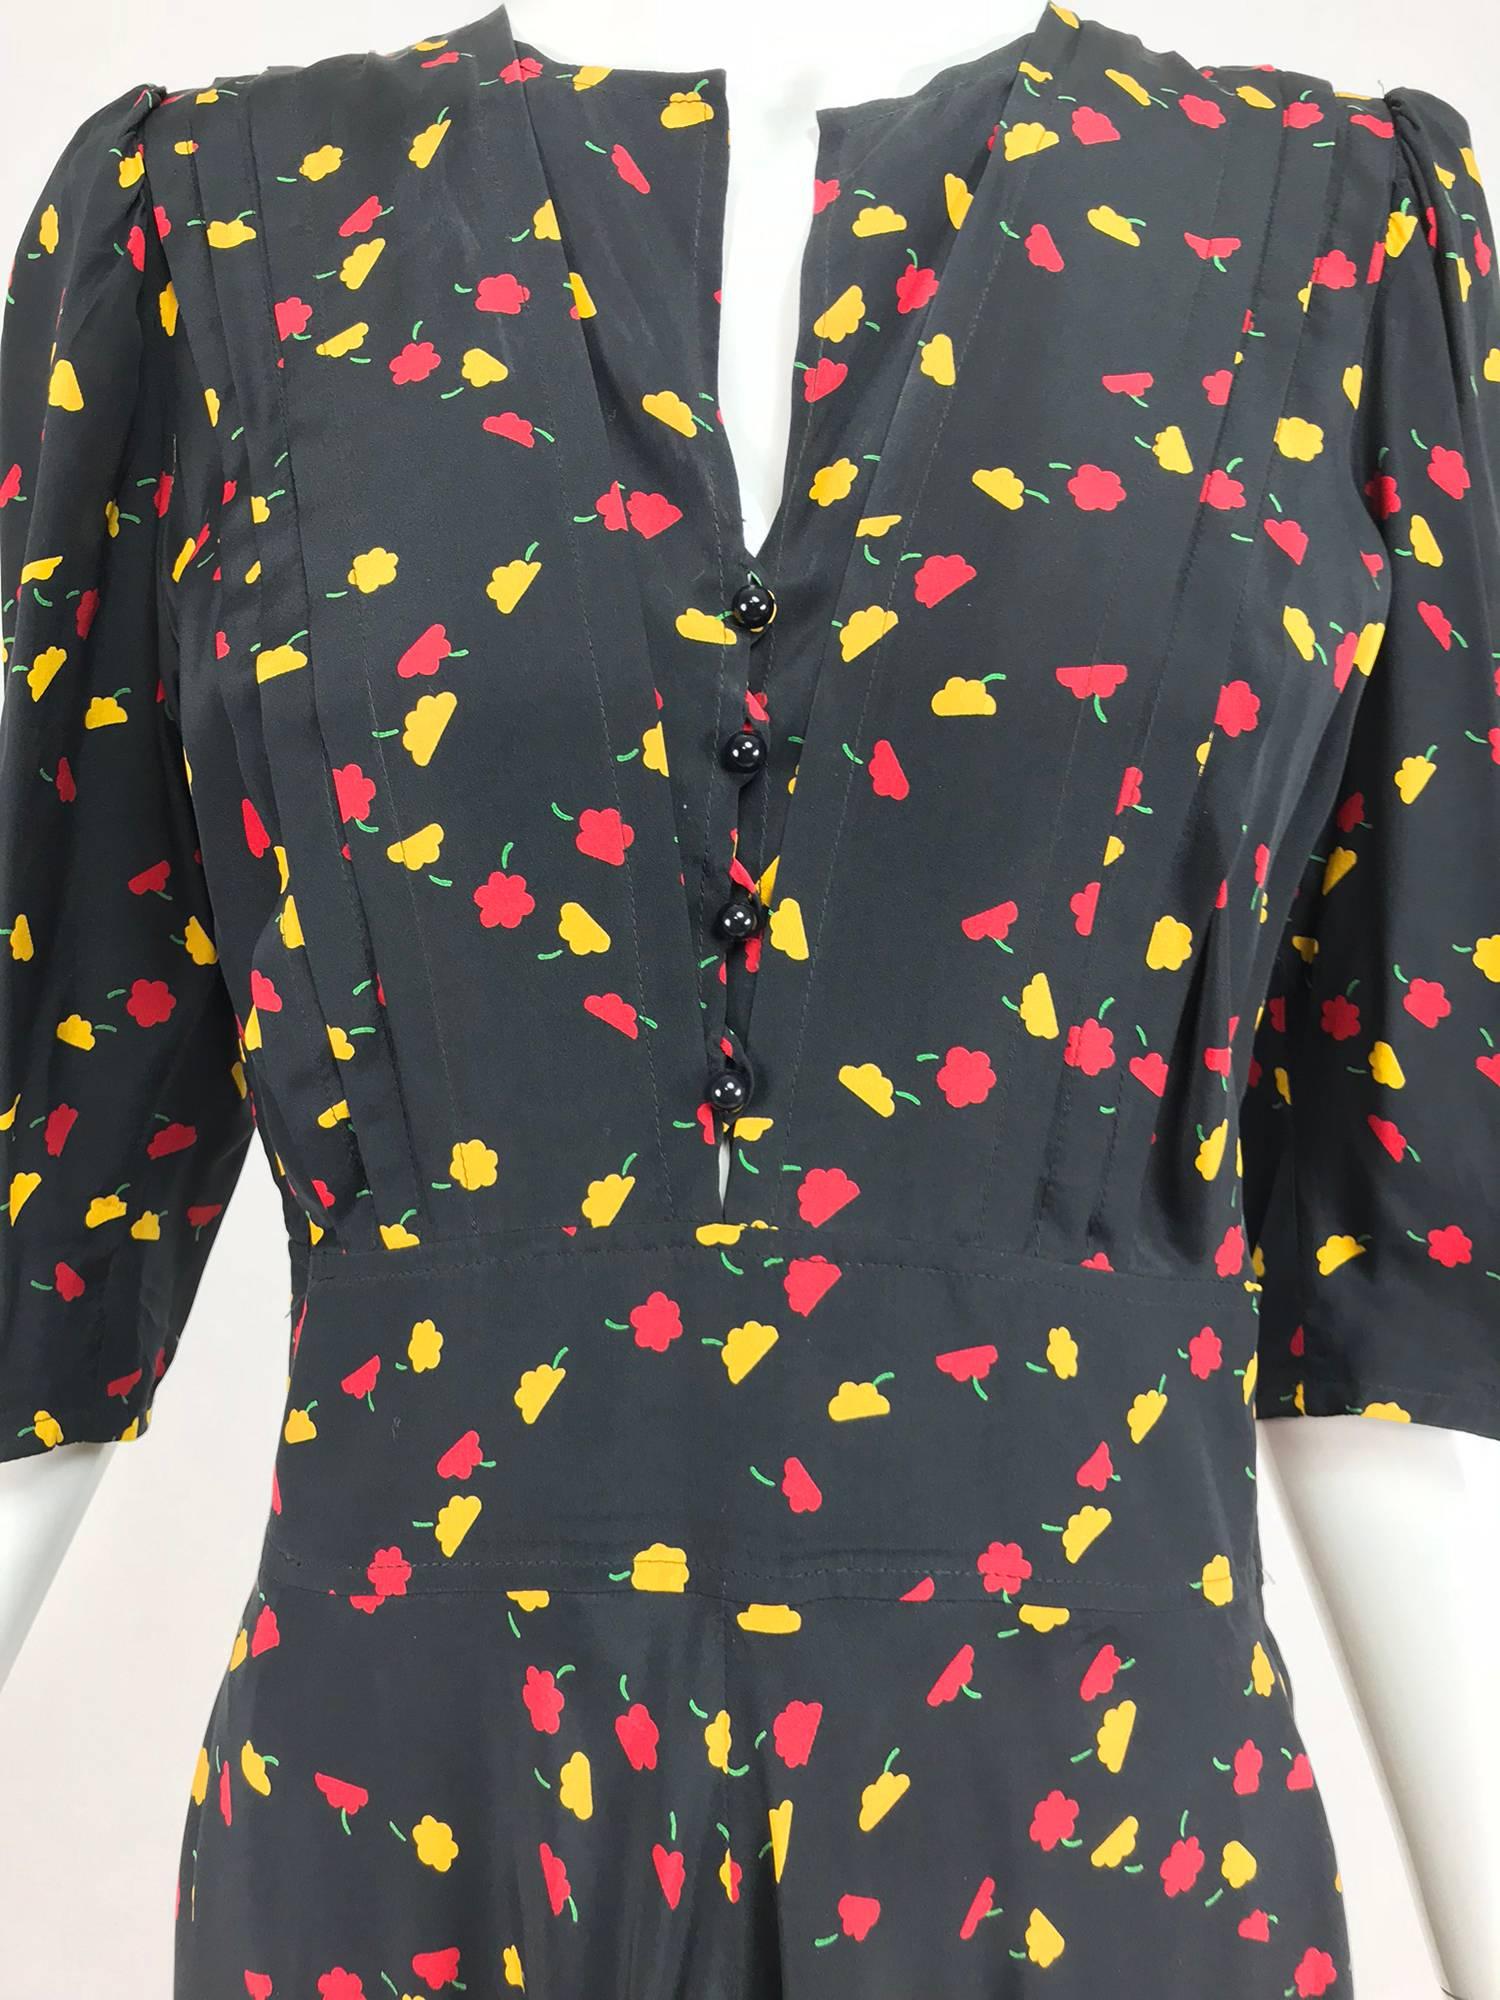 Ungaro floral print silk day dress from the 1970s...A summery dress in black silk with brightly coloured flowers scattered throughout...The jewel neck dress closes at the front with buttons and loops, elbow length sleeves and a semi fitted